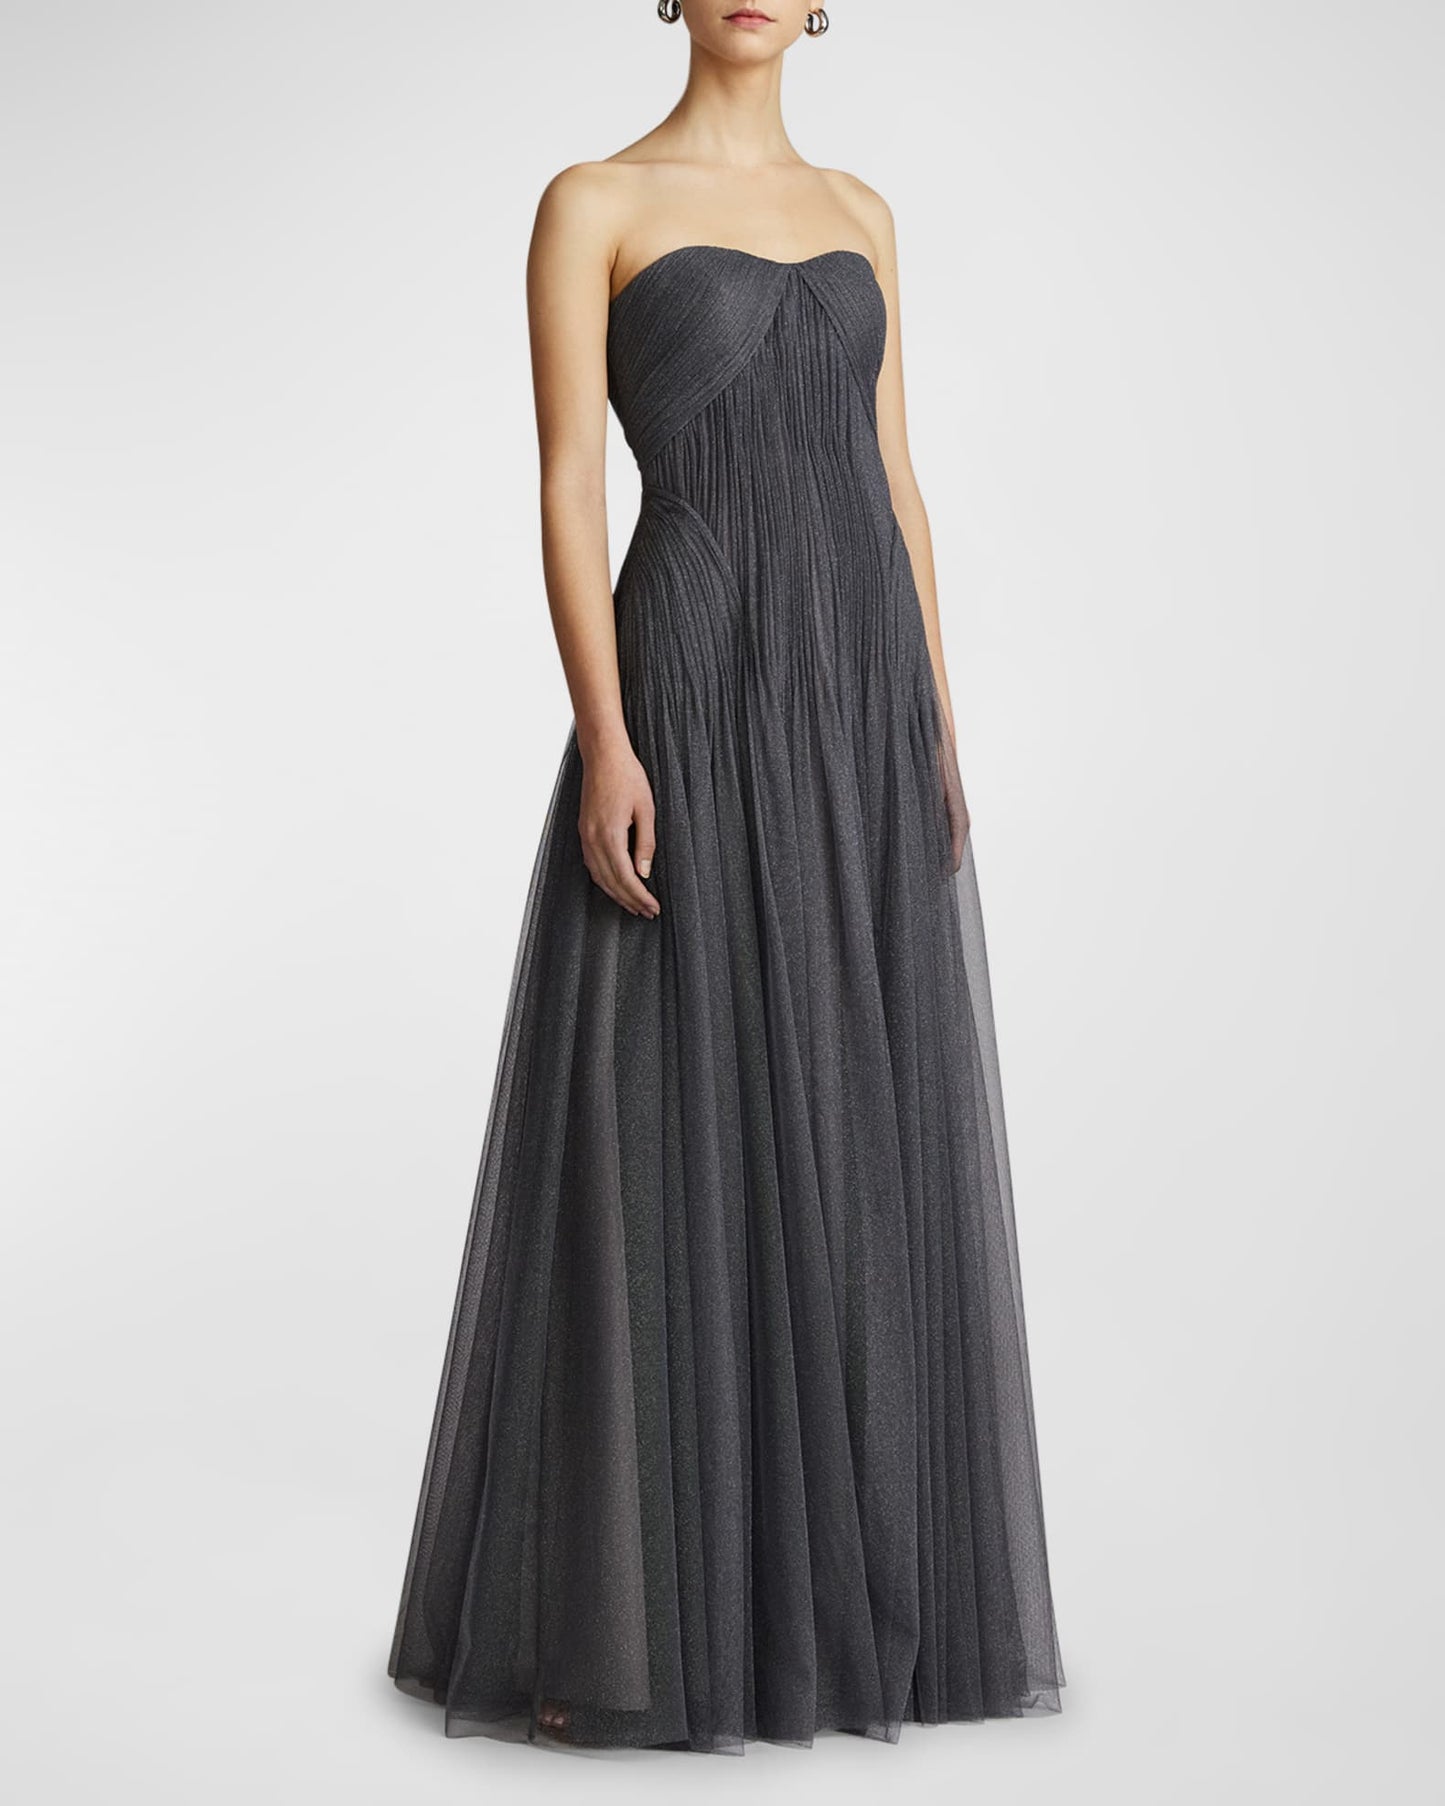 Zac Posen- Removable Cap Sleeve Tulle Gown